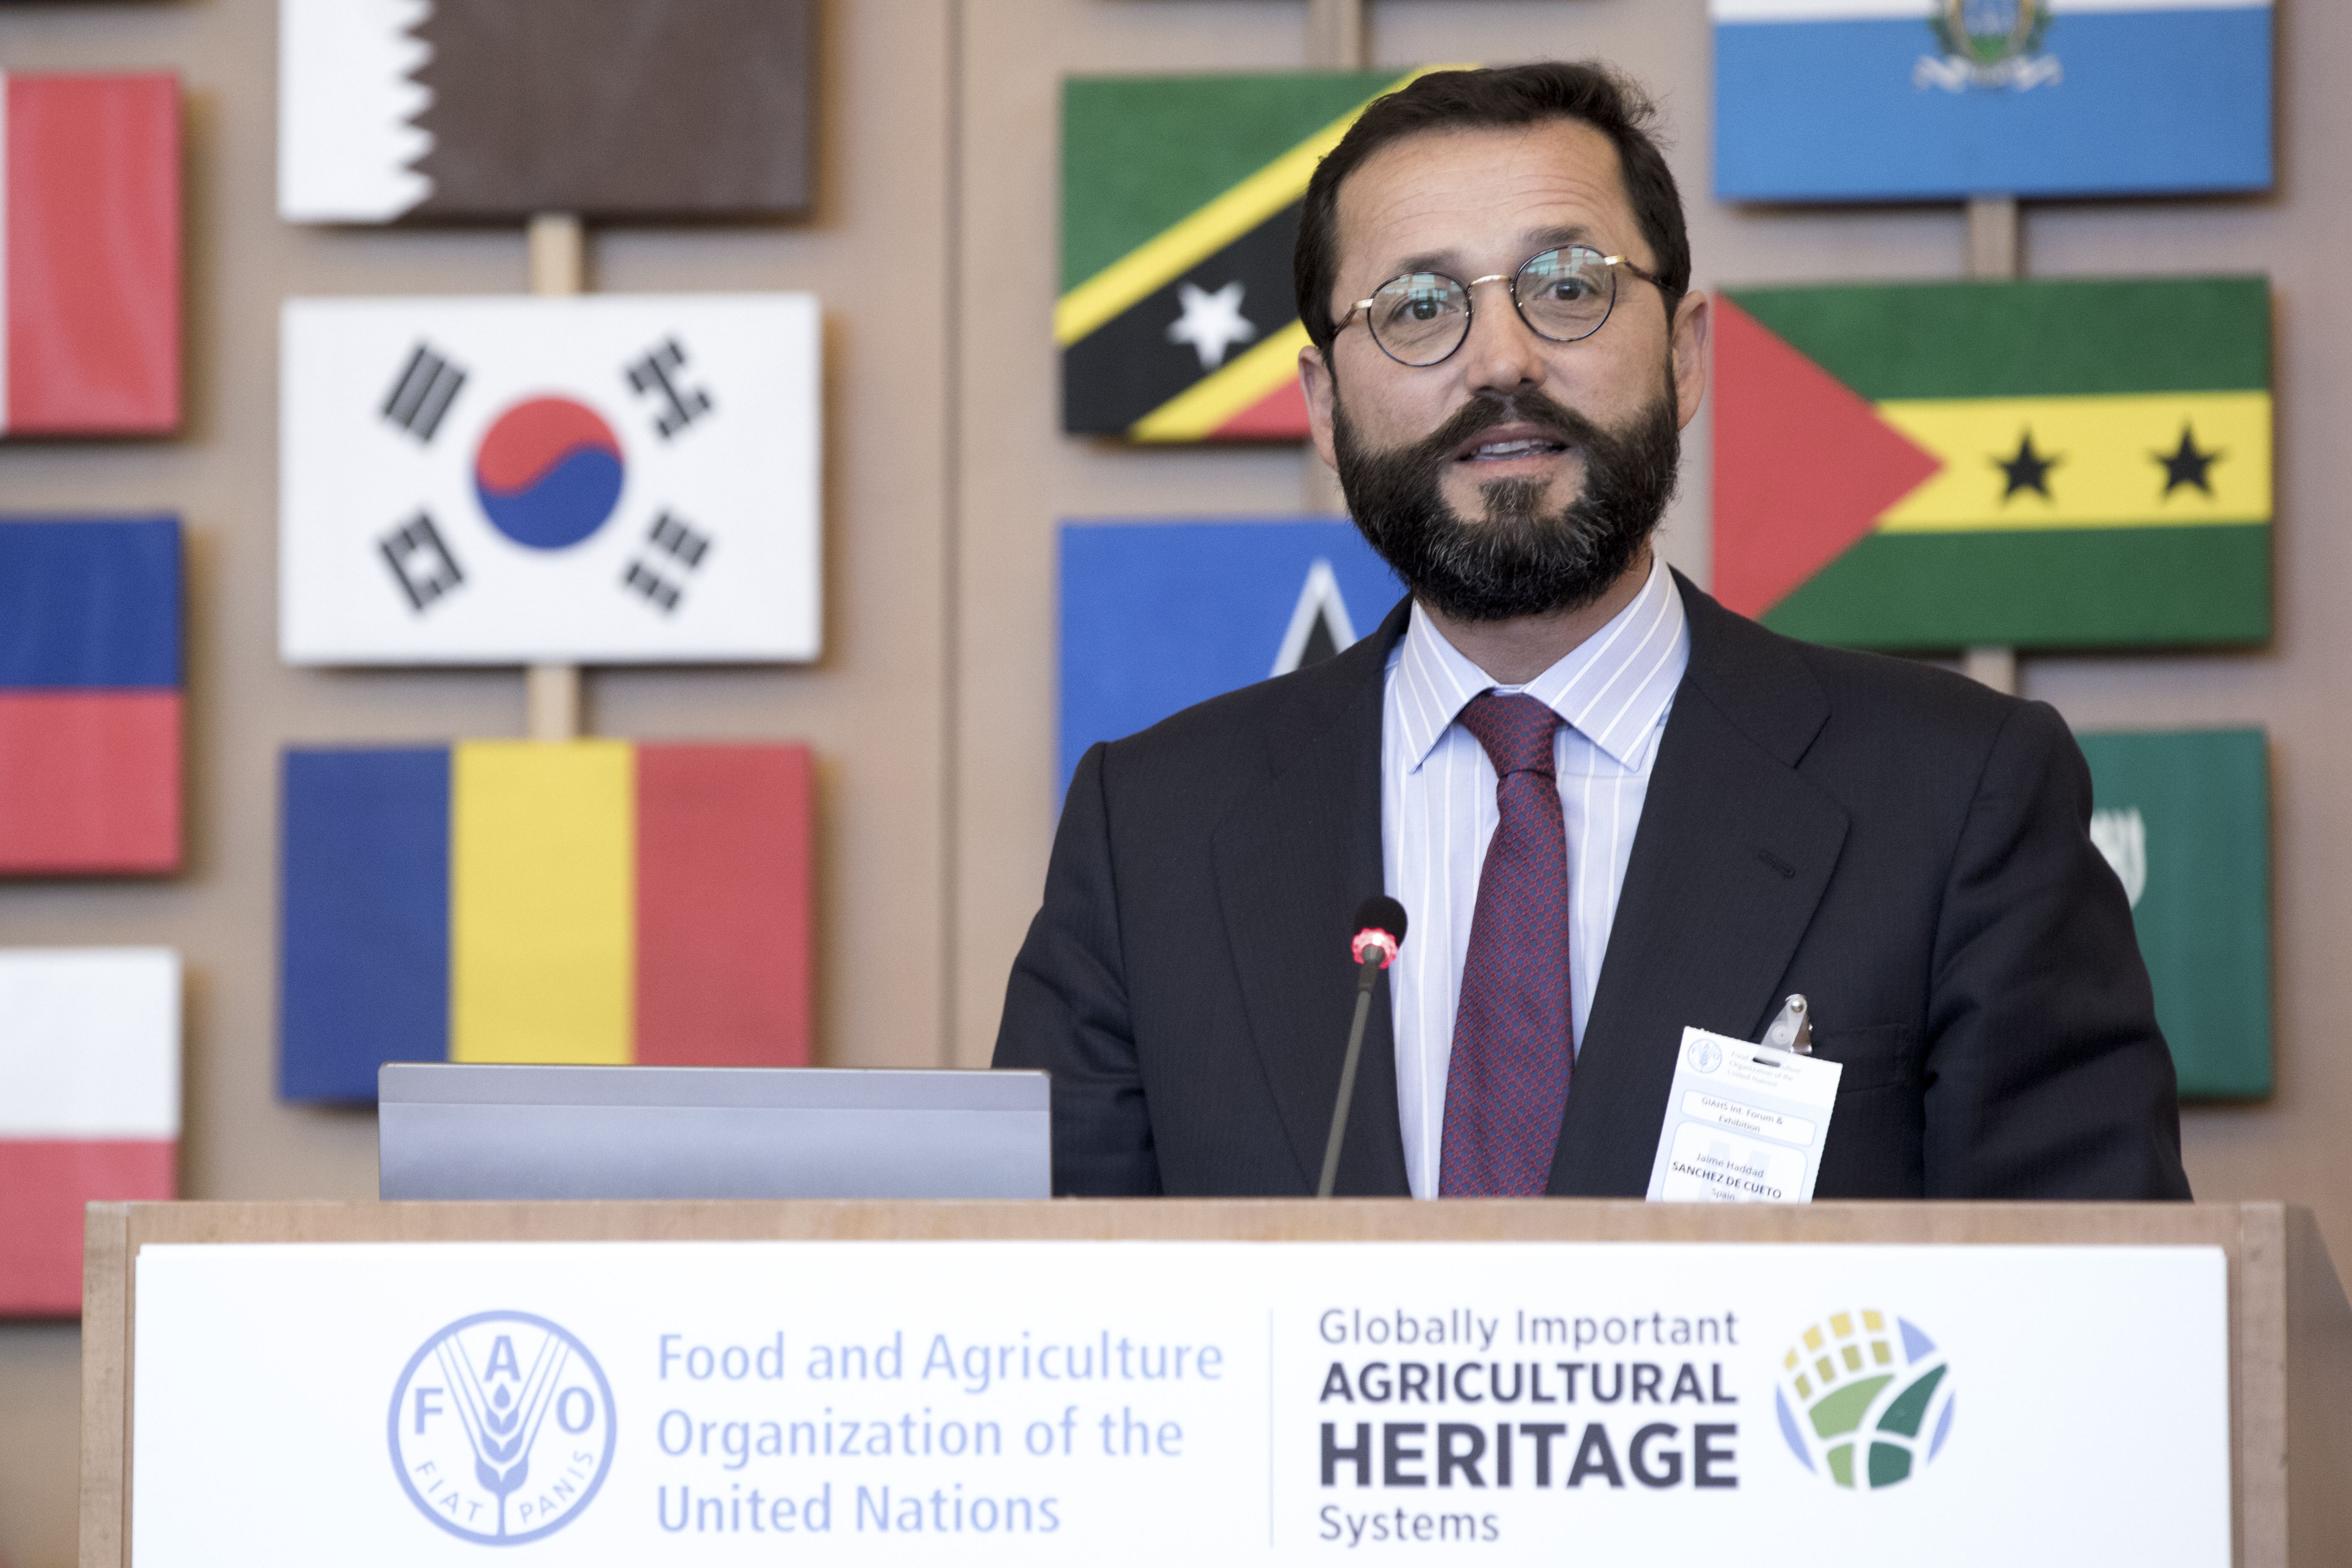 19 April 2018, Rome, Italy - Mr Jaime Haddad Sanchez de Cueto, Vice-Minister of Agriculture, Fisheries, Food and Environment, Spain. Globally Important Agricultural Heritage Systems (GIAHS) International Forum and  Certificate Award Ceremony, (Green Room), FAO Headquarters.